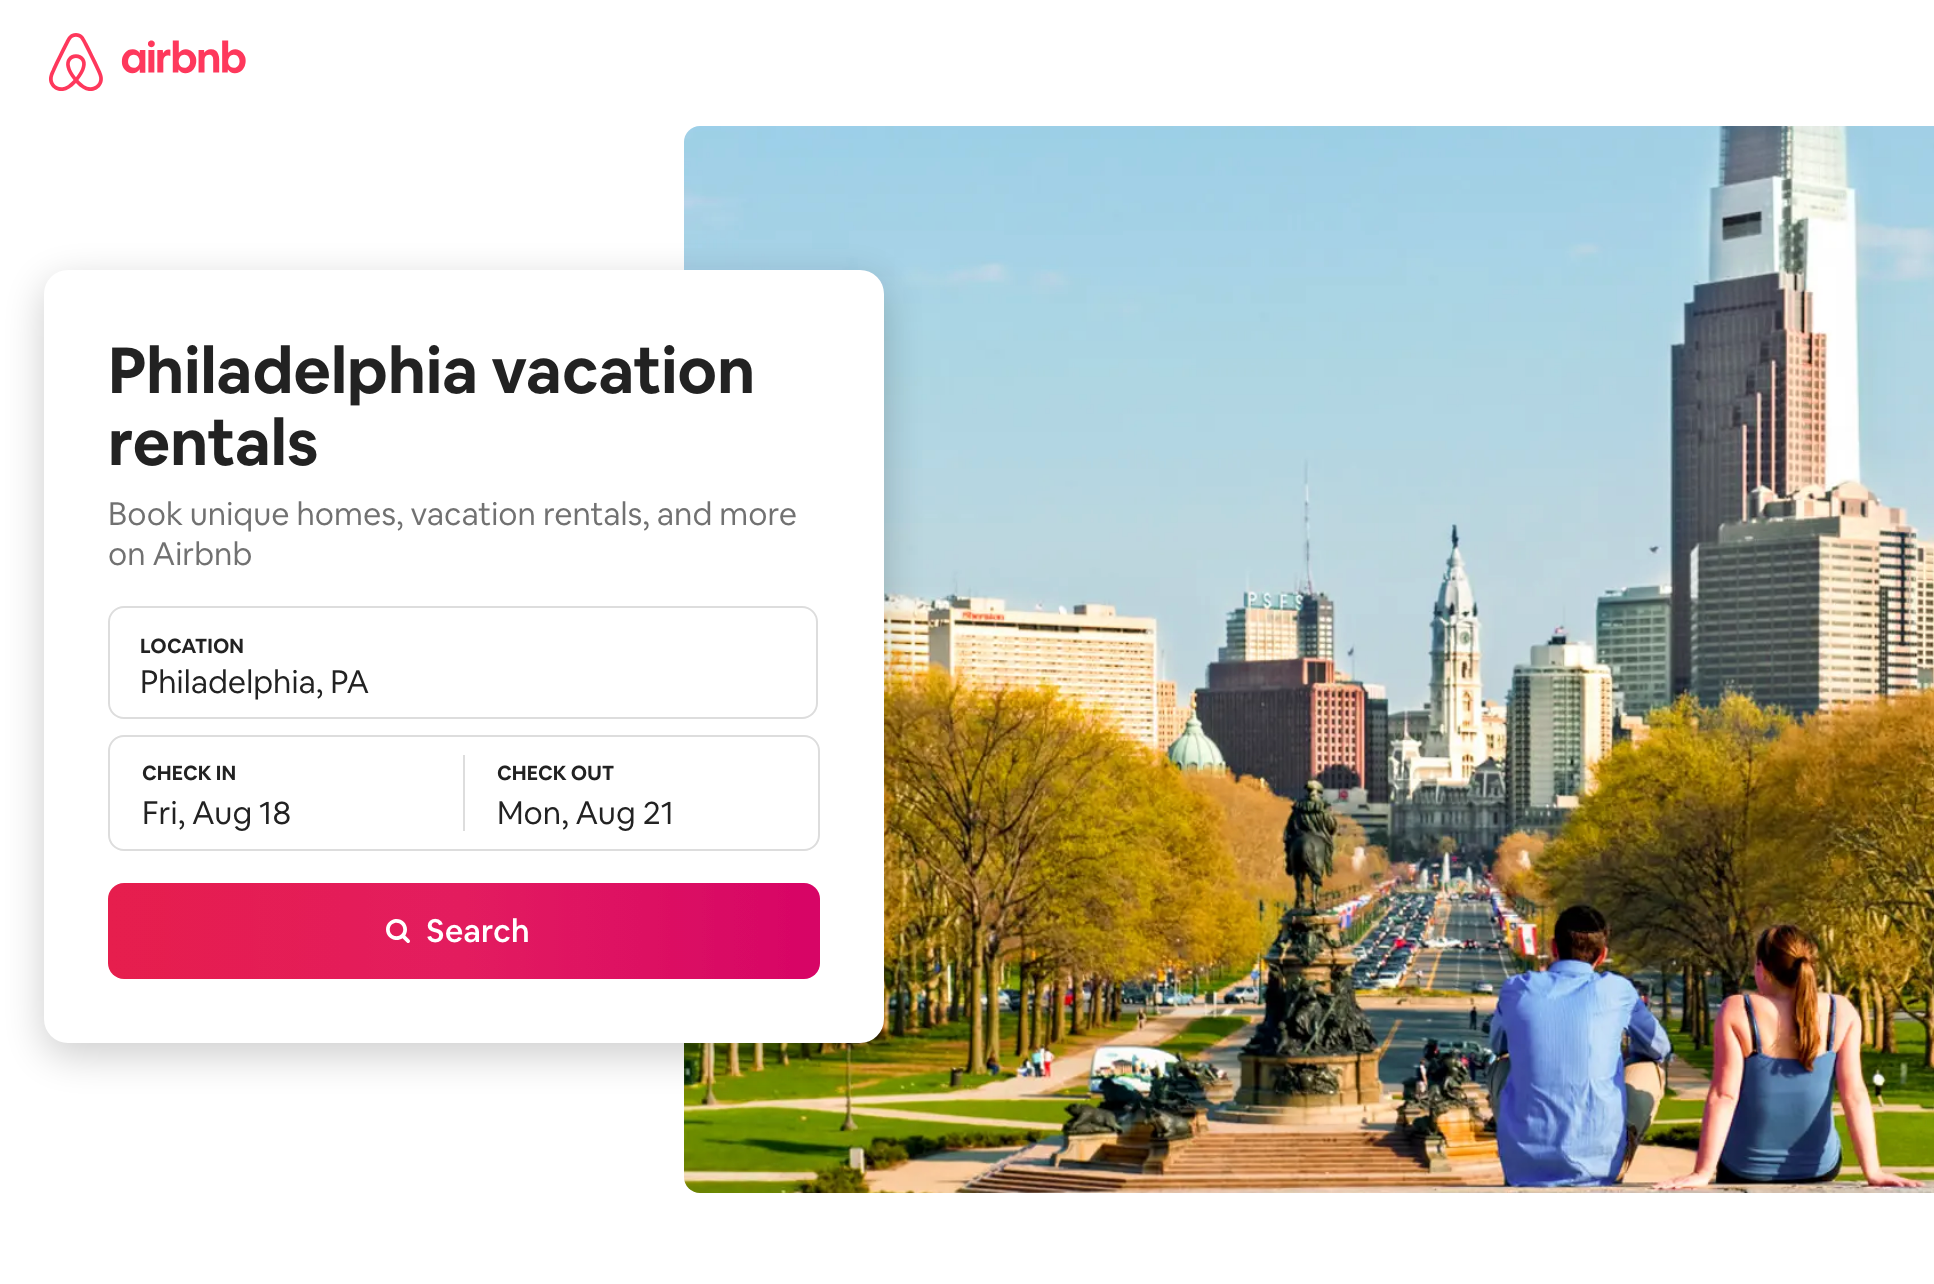 Philly considers whether to tighten or ease Airbnb regulations